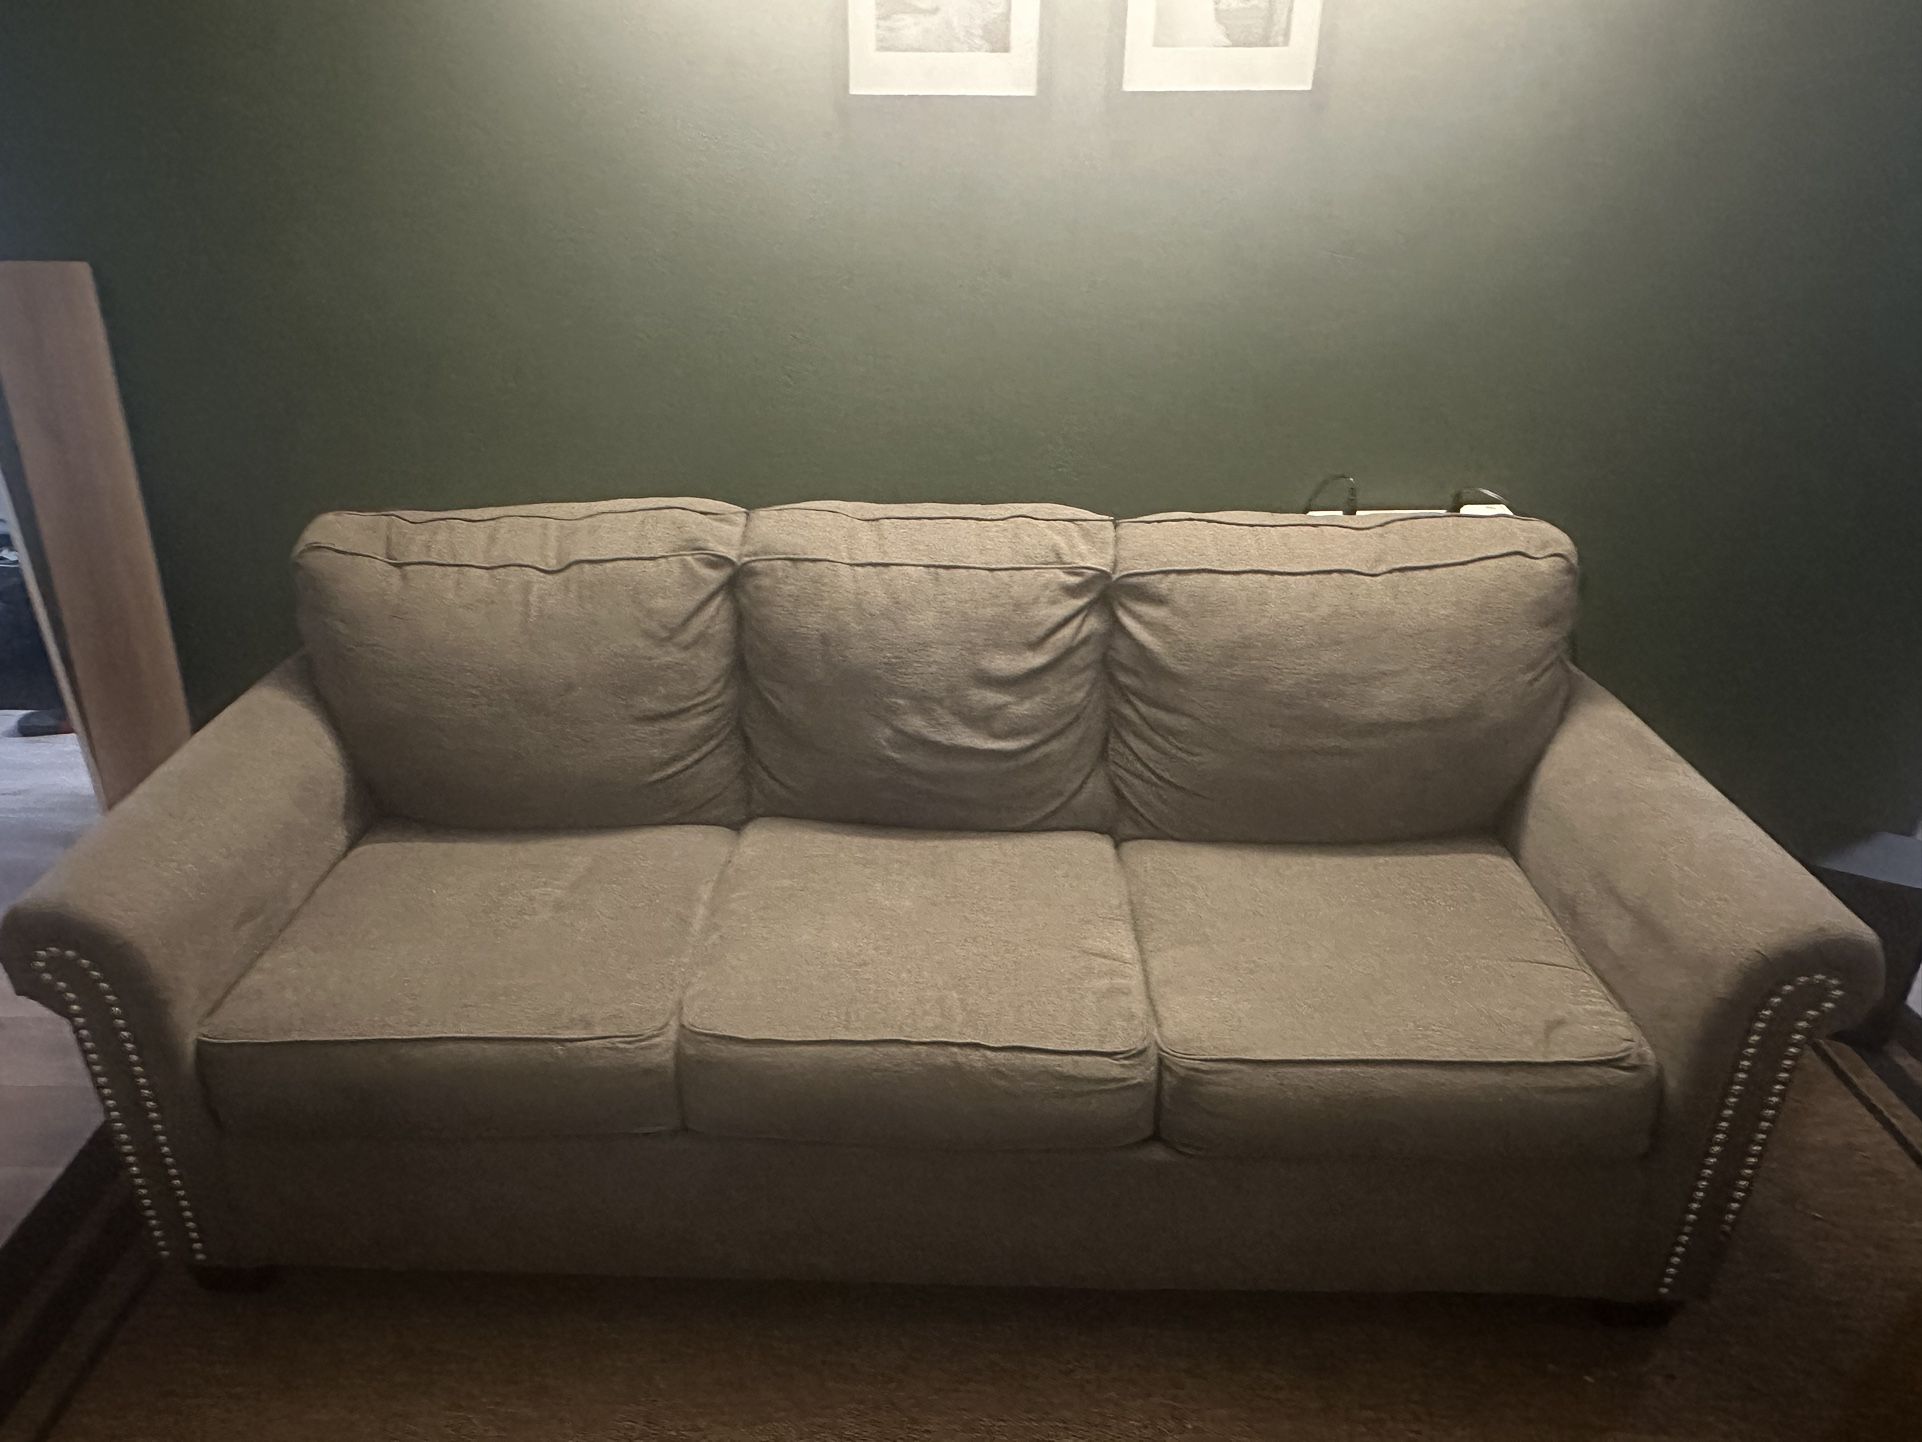 3 Gray Couches 